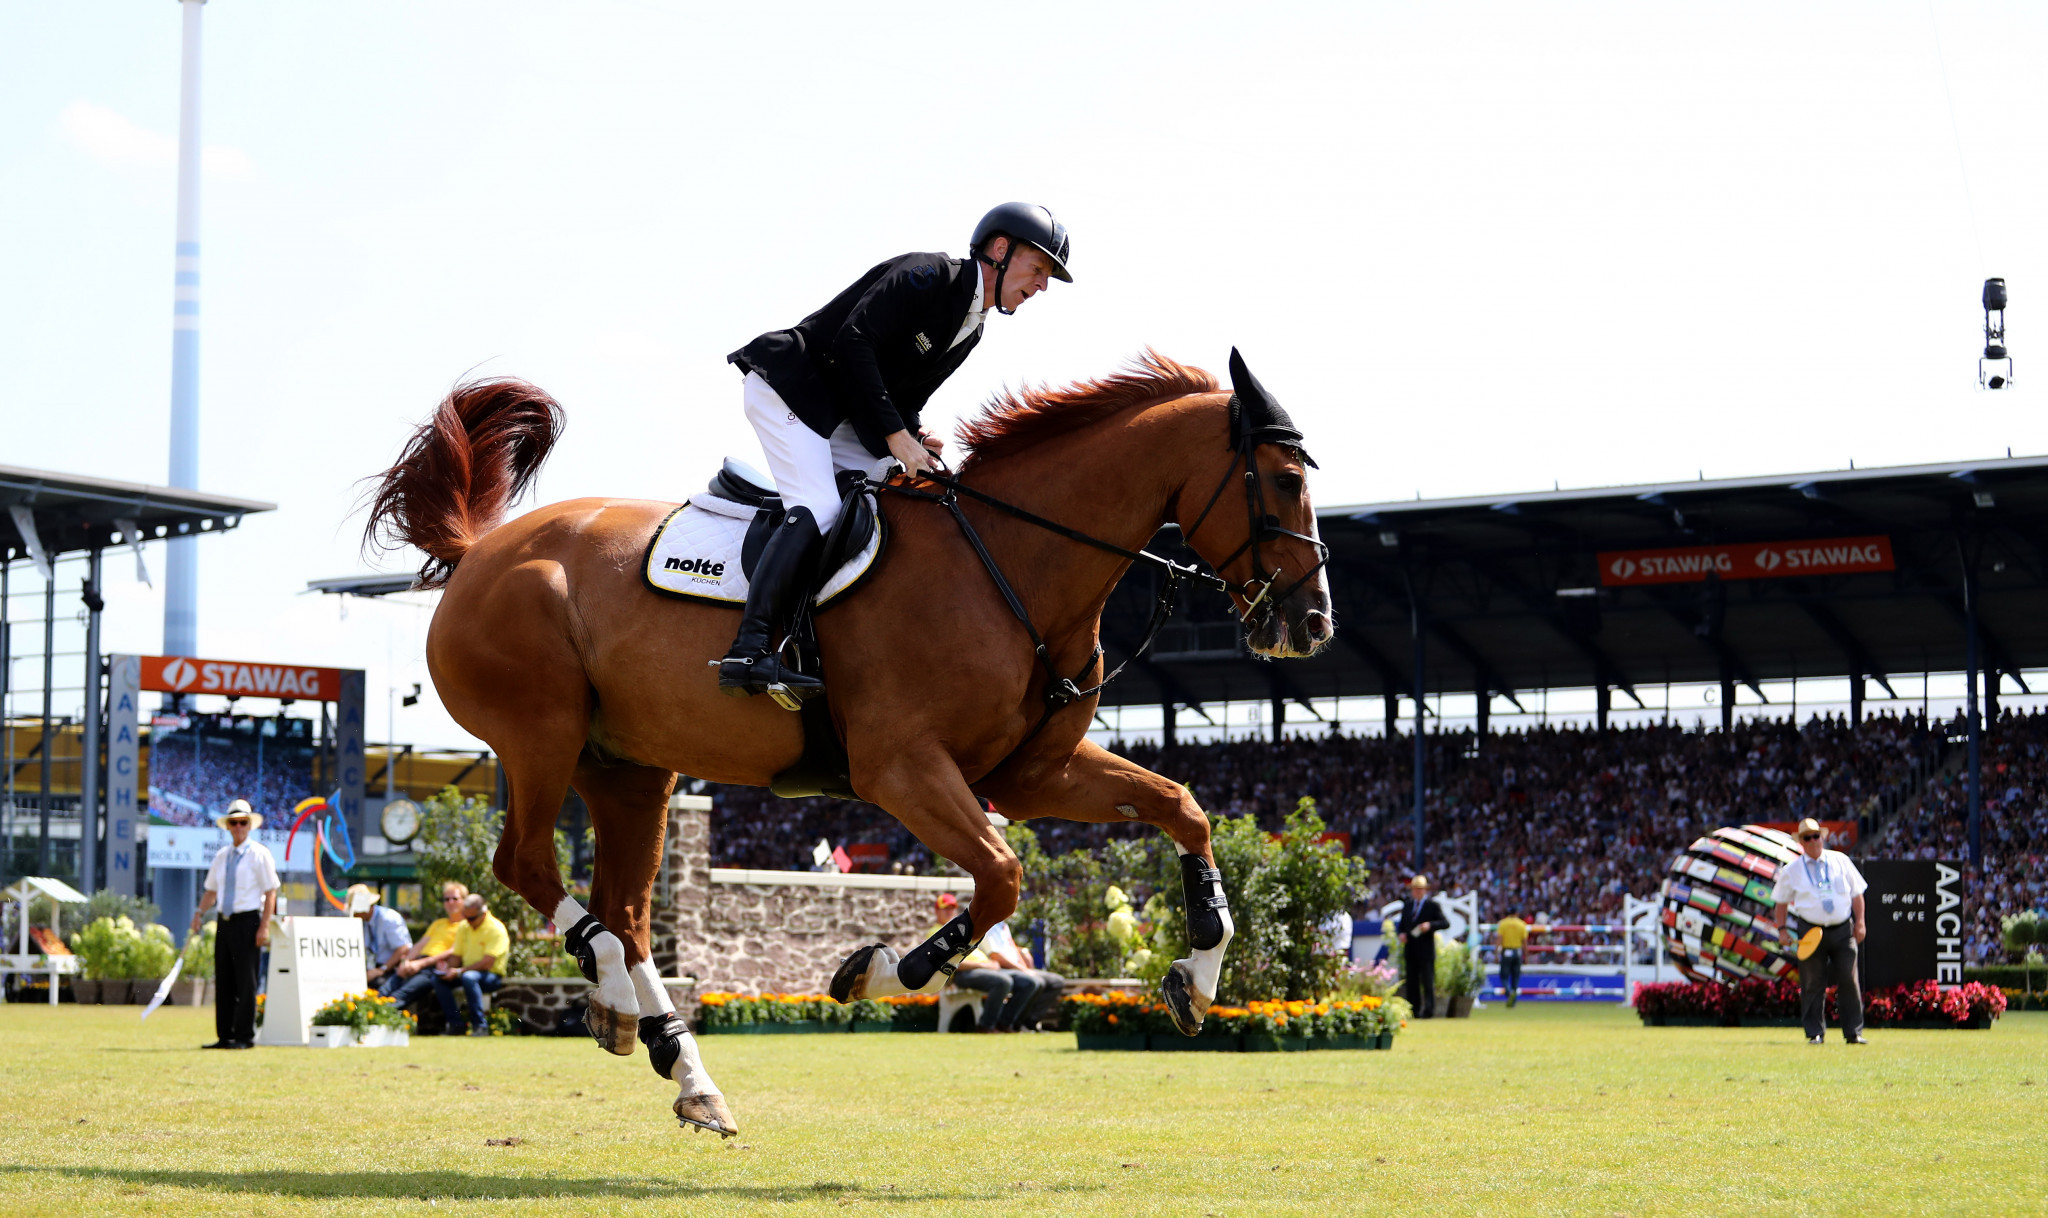 Marcus Ehning went clear for Germany ©Getty Images